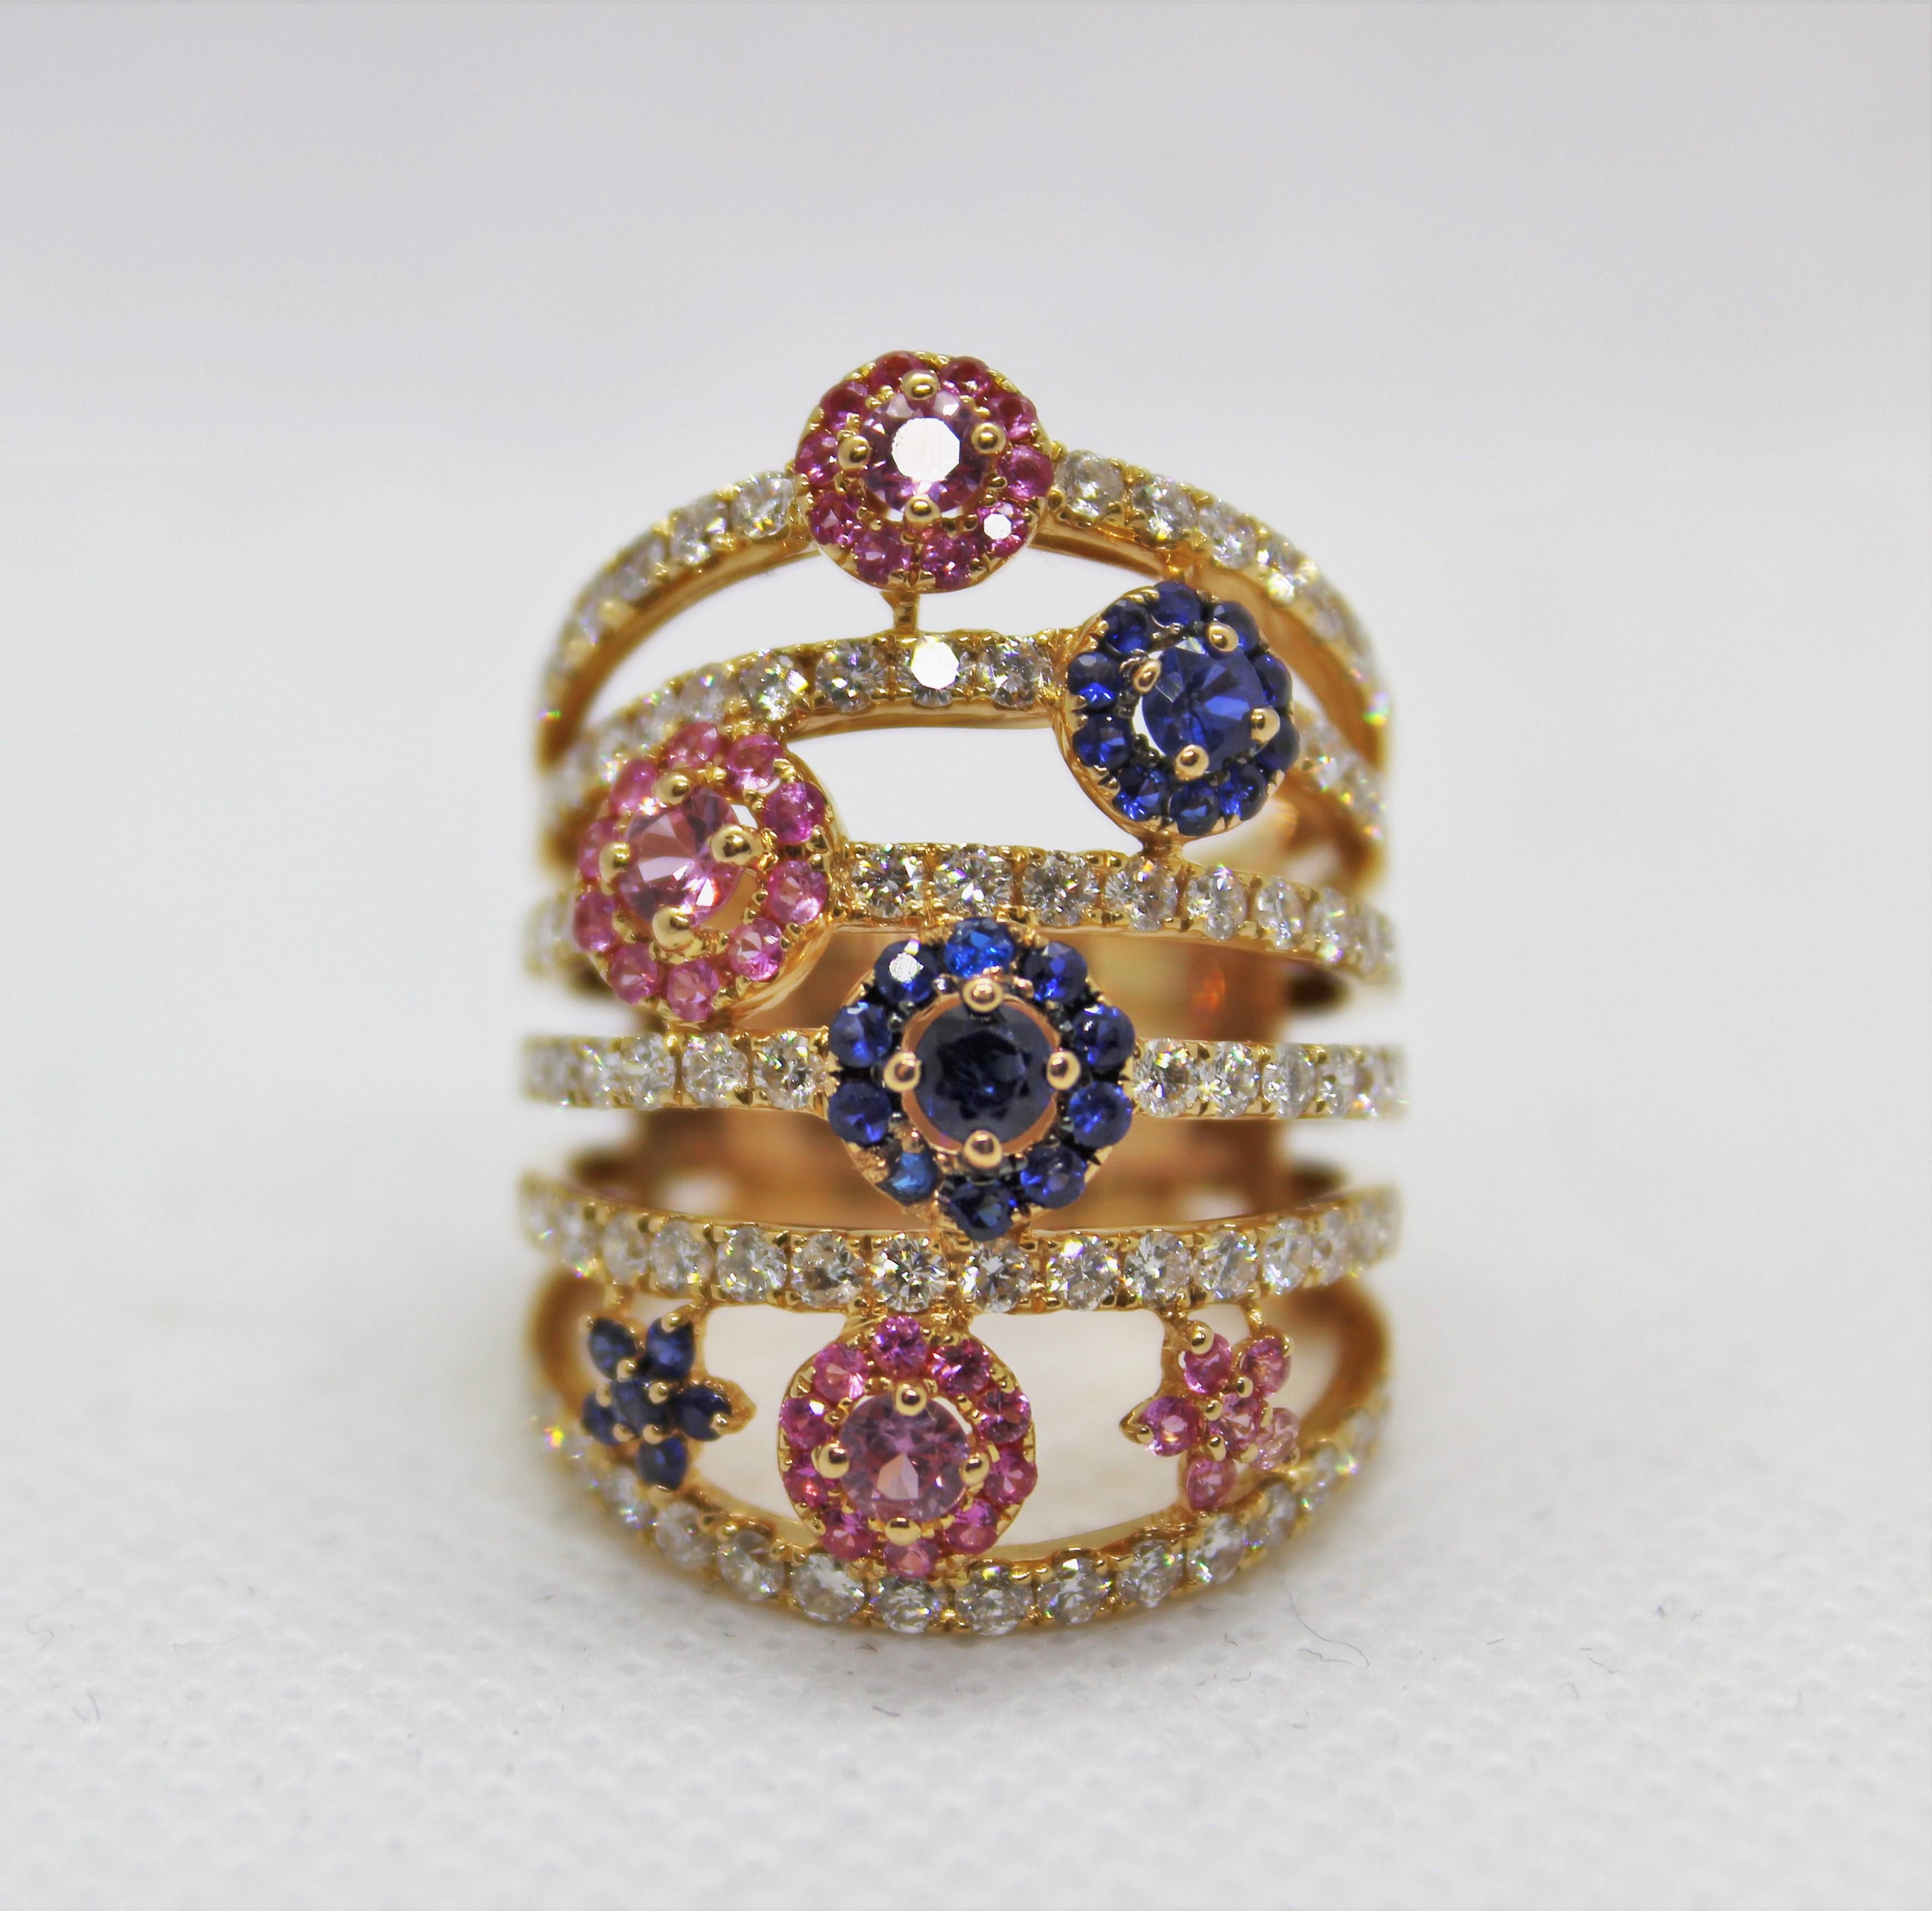 Beautiful rose 18k gold ring with blue and rose sapphires total 1 ct. Diamonds round brillant cut 1.60 ct . Internal 14k Gold removable measure adjustment.

Size : US 6 ( with adjustment ) US 7 (removing it)
           Internal Diameter mm 16.40